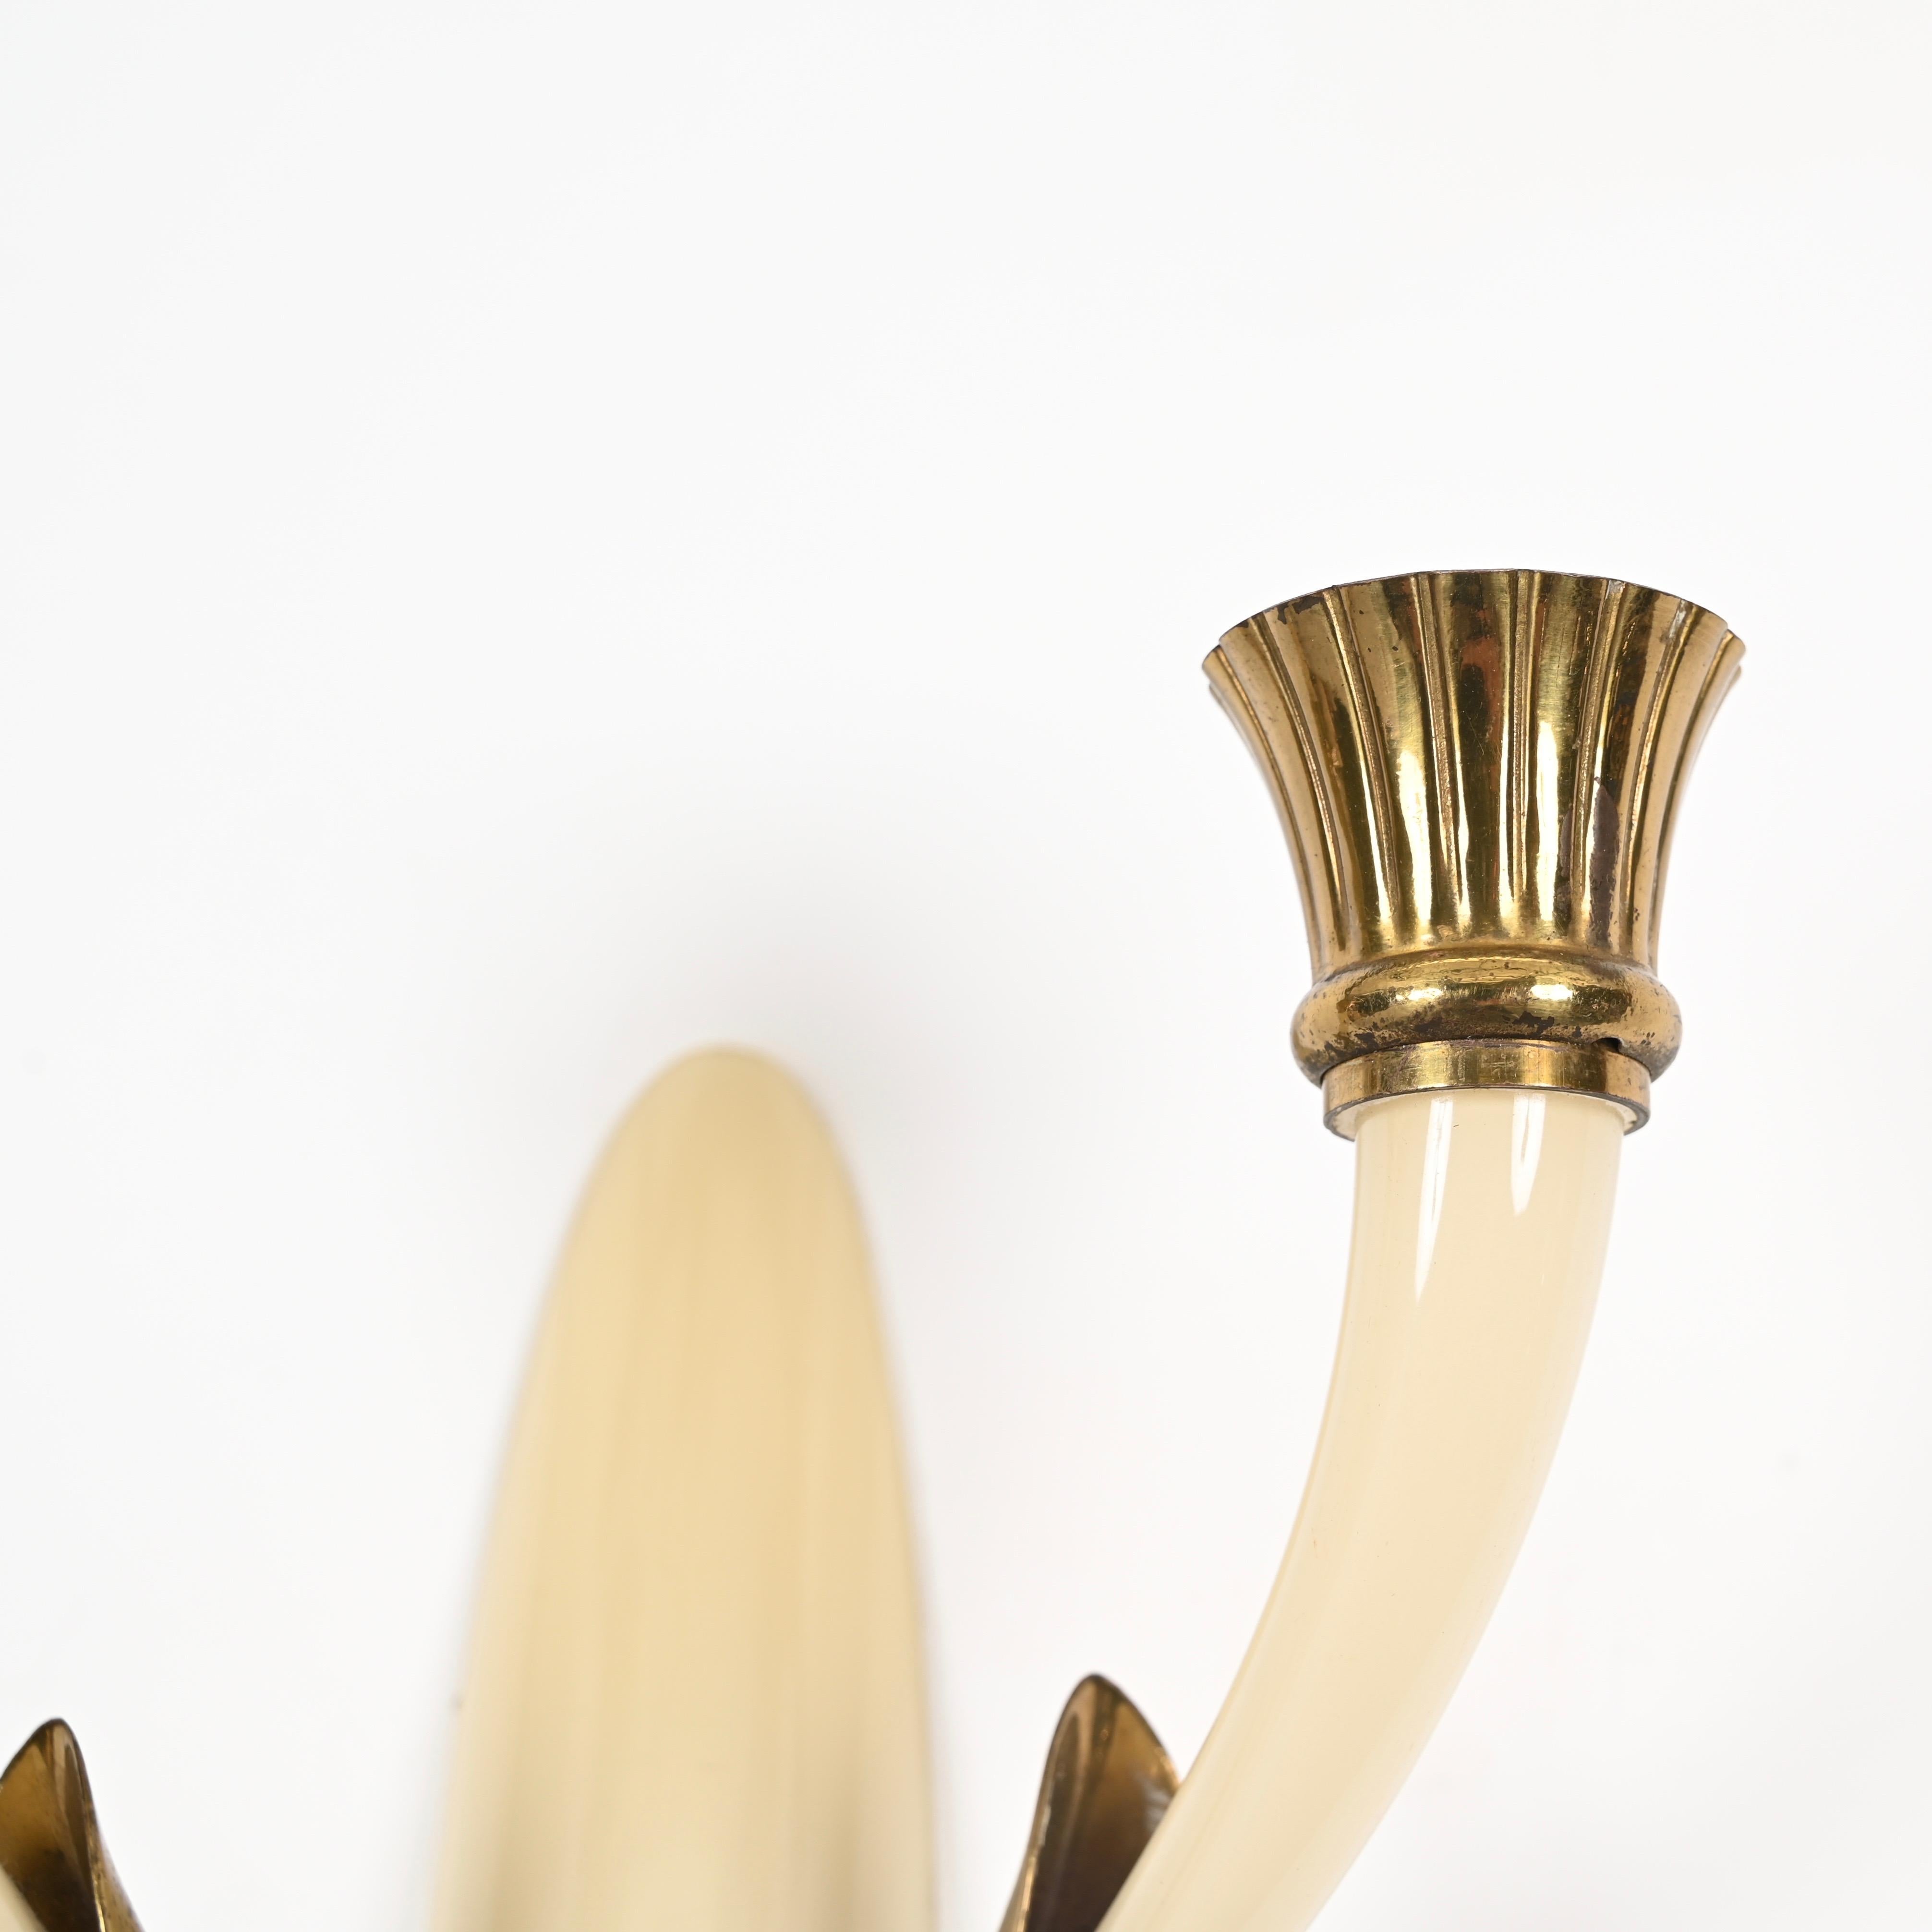 Mid-20th Century Pair of Italian Sconces in Ivory Murano Glass and Brass by Ulrich, Italy 1940s For Sale